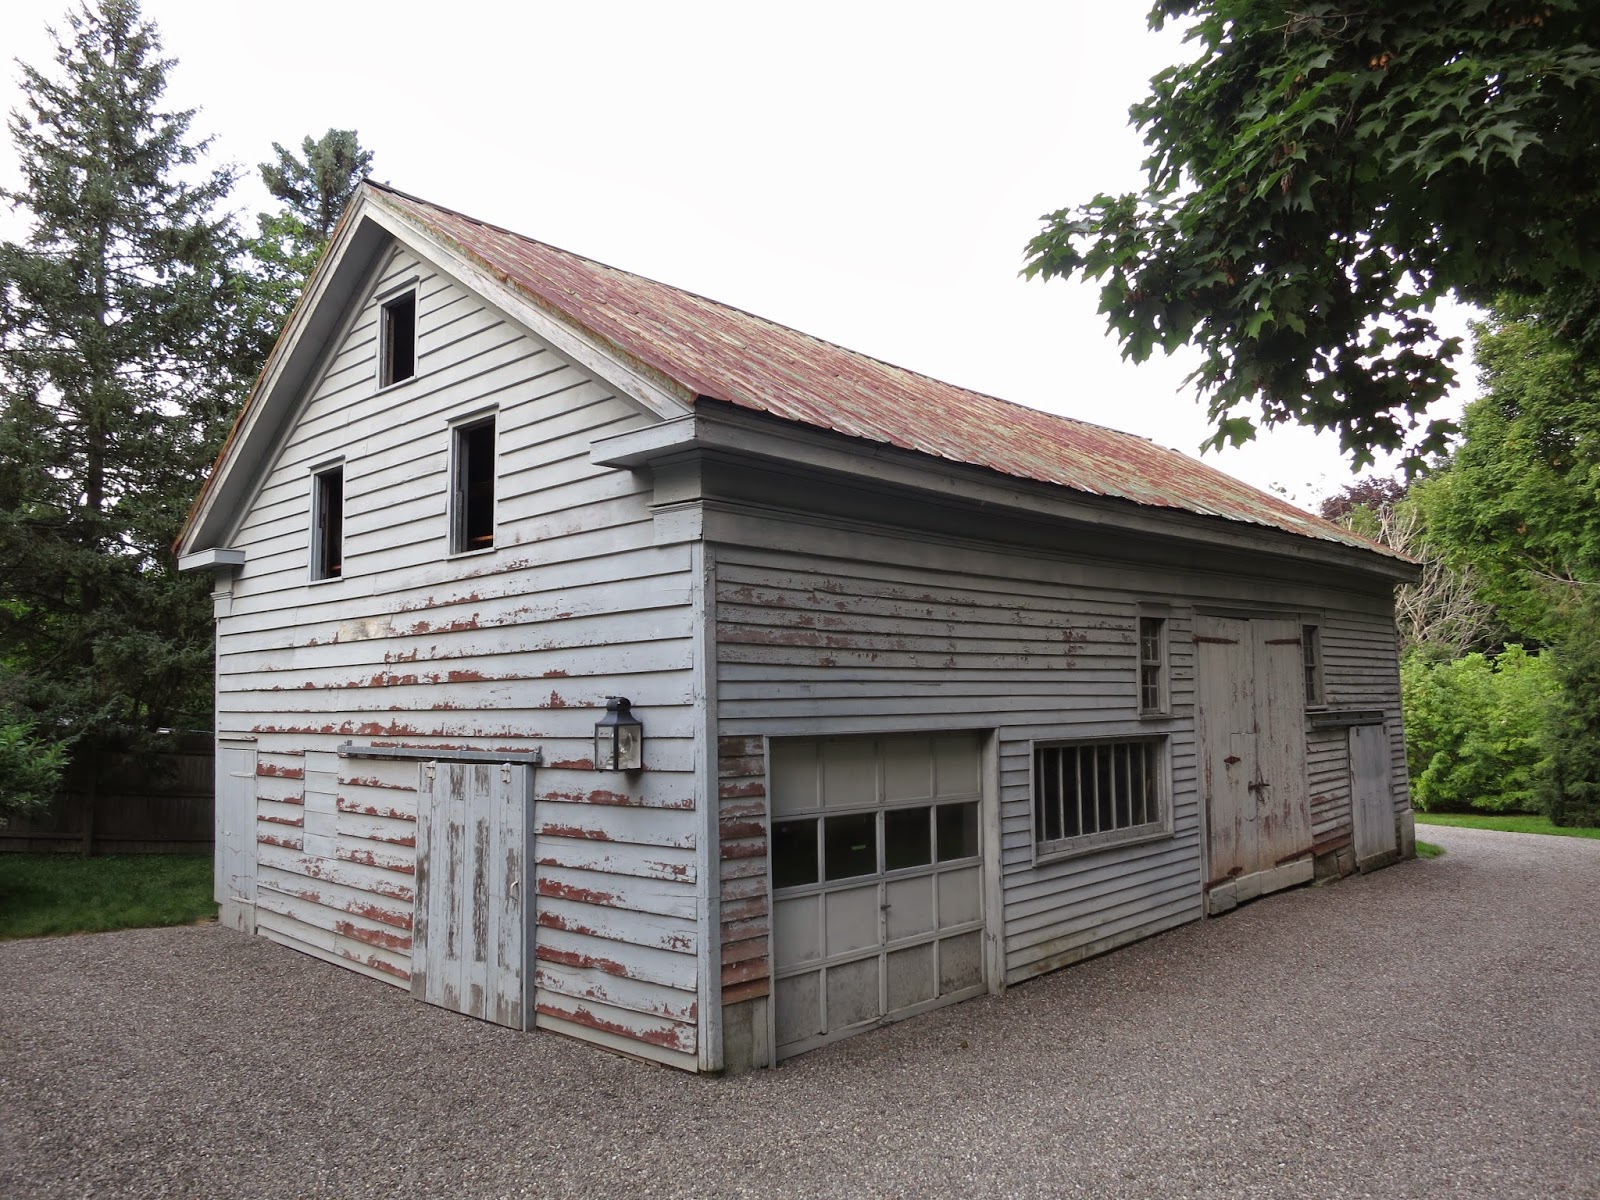 Reggie Darling: The Old Gray Barn Is Getting a Facelift